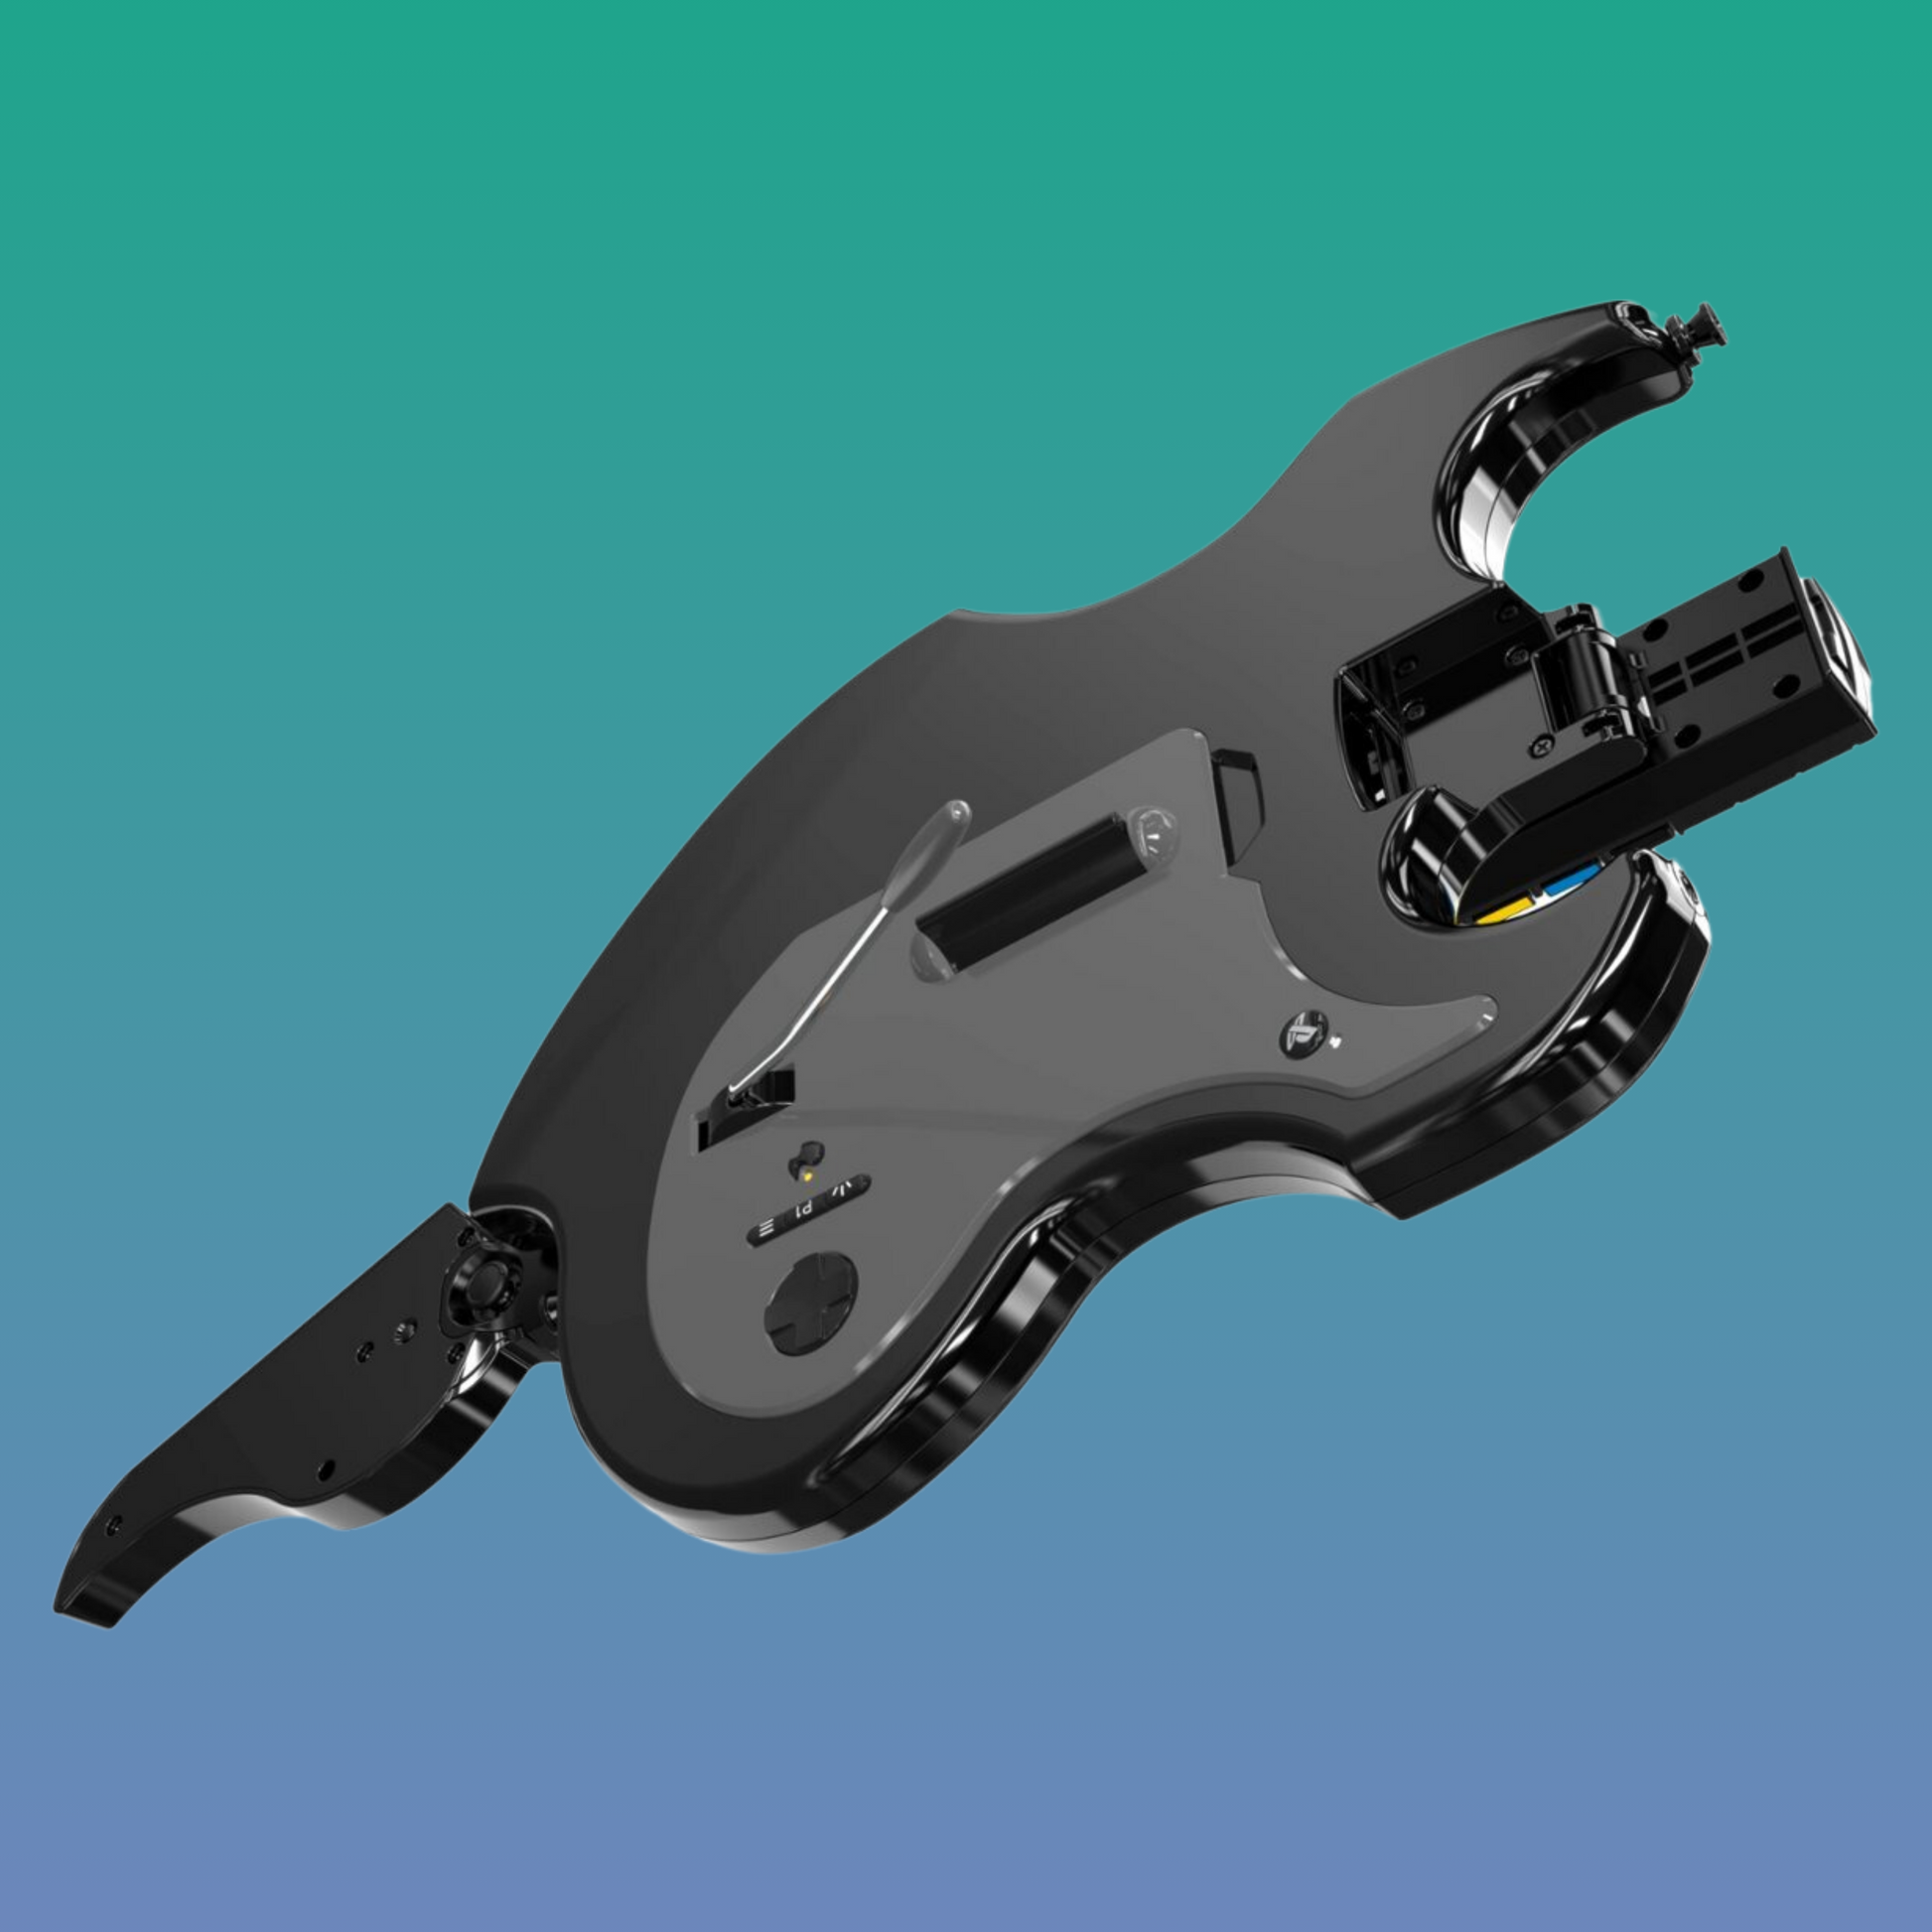 Product Image : <p>Master your virtual guitar skills with the Riffmaster wireless controller for PS4 &amp; PS5. With a 30ft wireless range, rechargeable battery lasting up to 36 hours, and versatile design for left/right-handed players, this controller offers comfort and convenience. Pre-order now to rock out on Rock Band 4 and Fortnite Festival.</p>